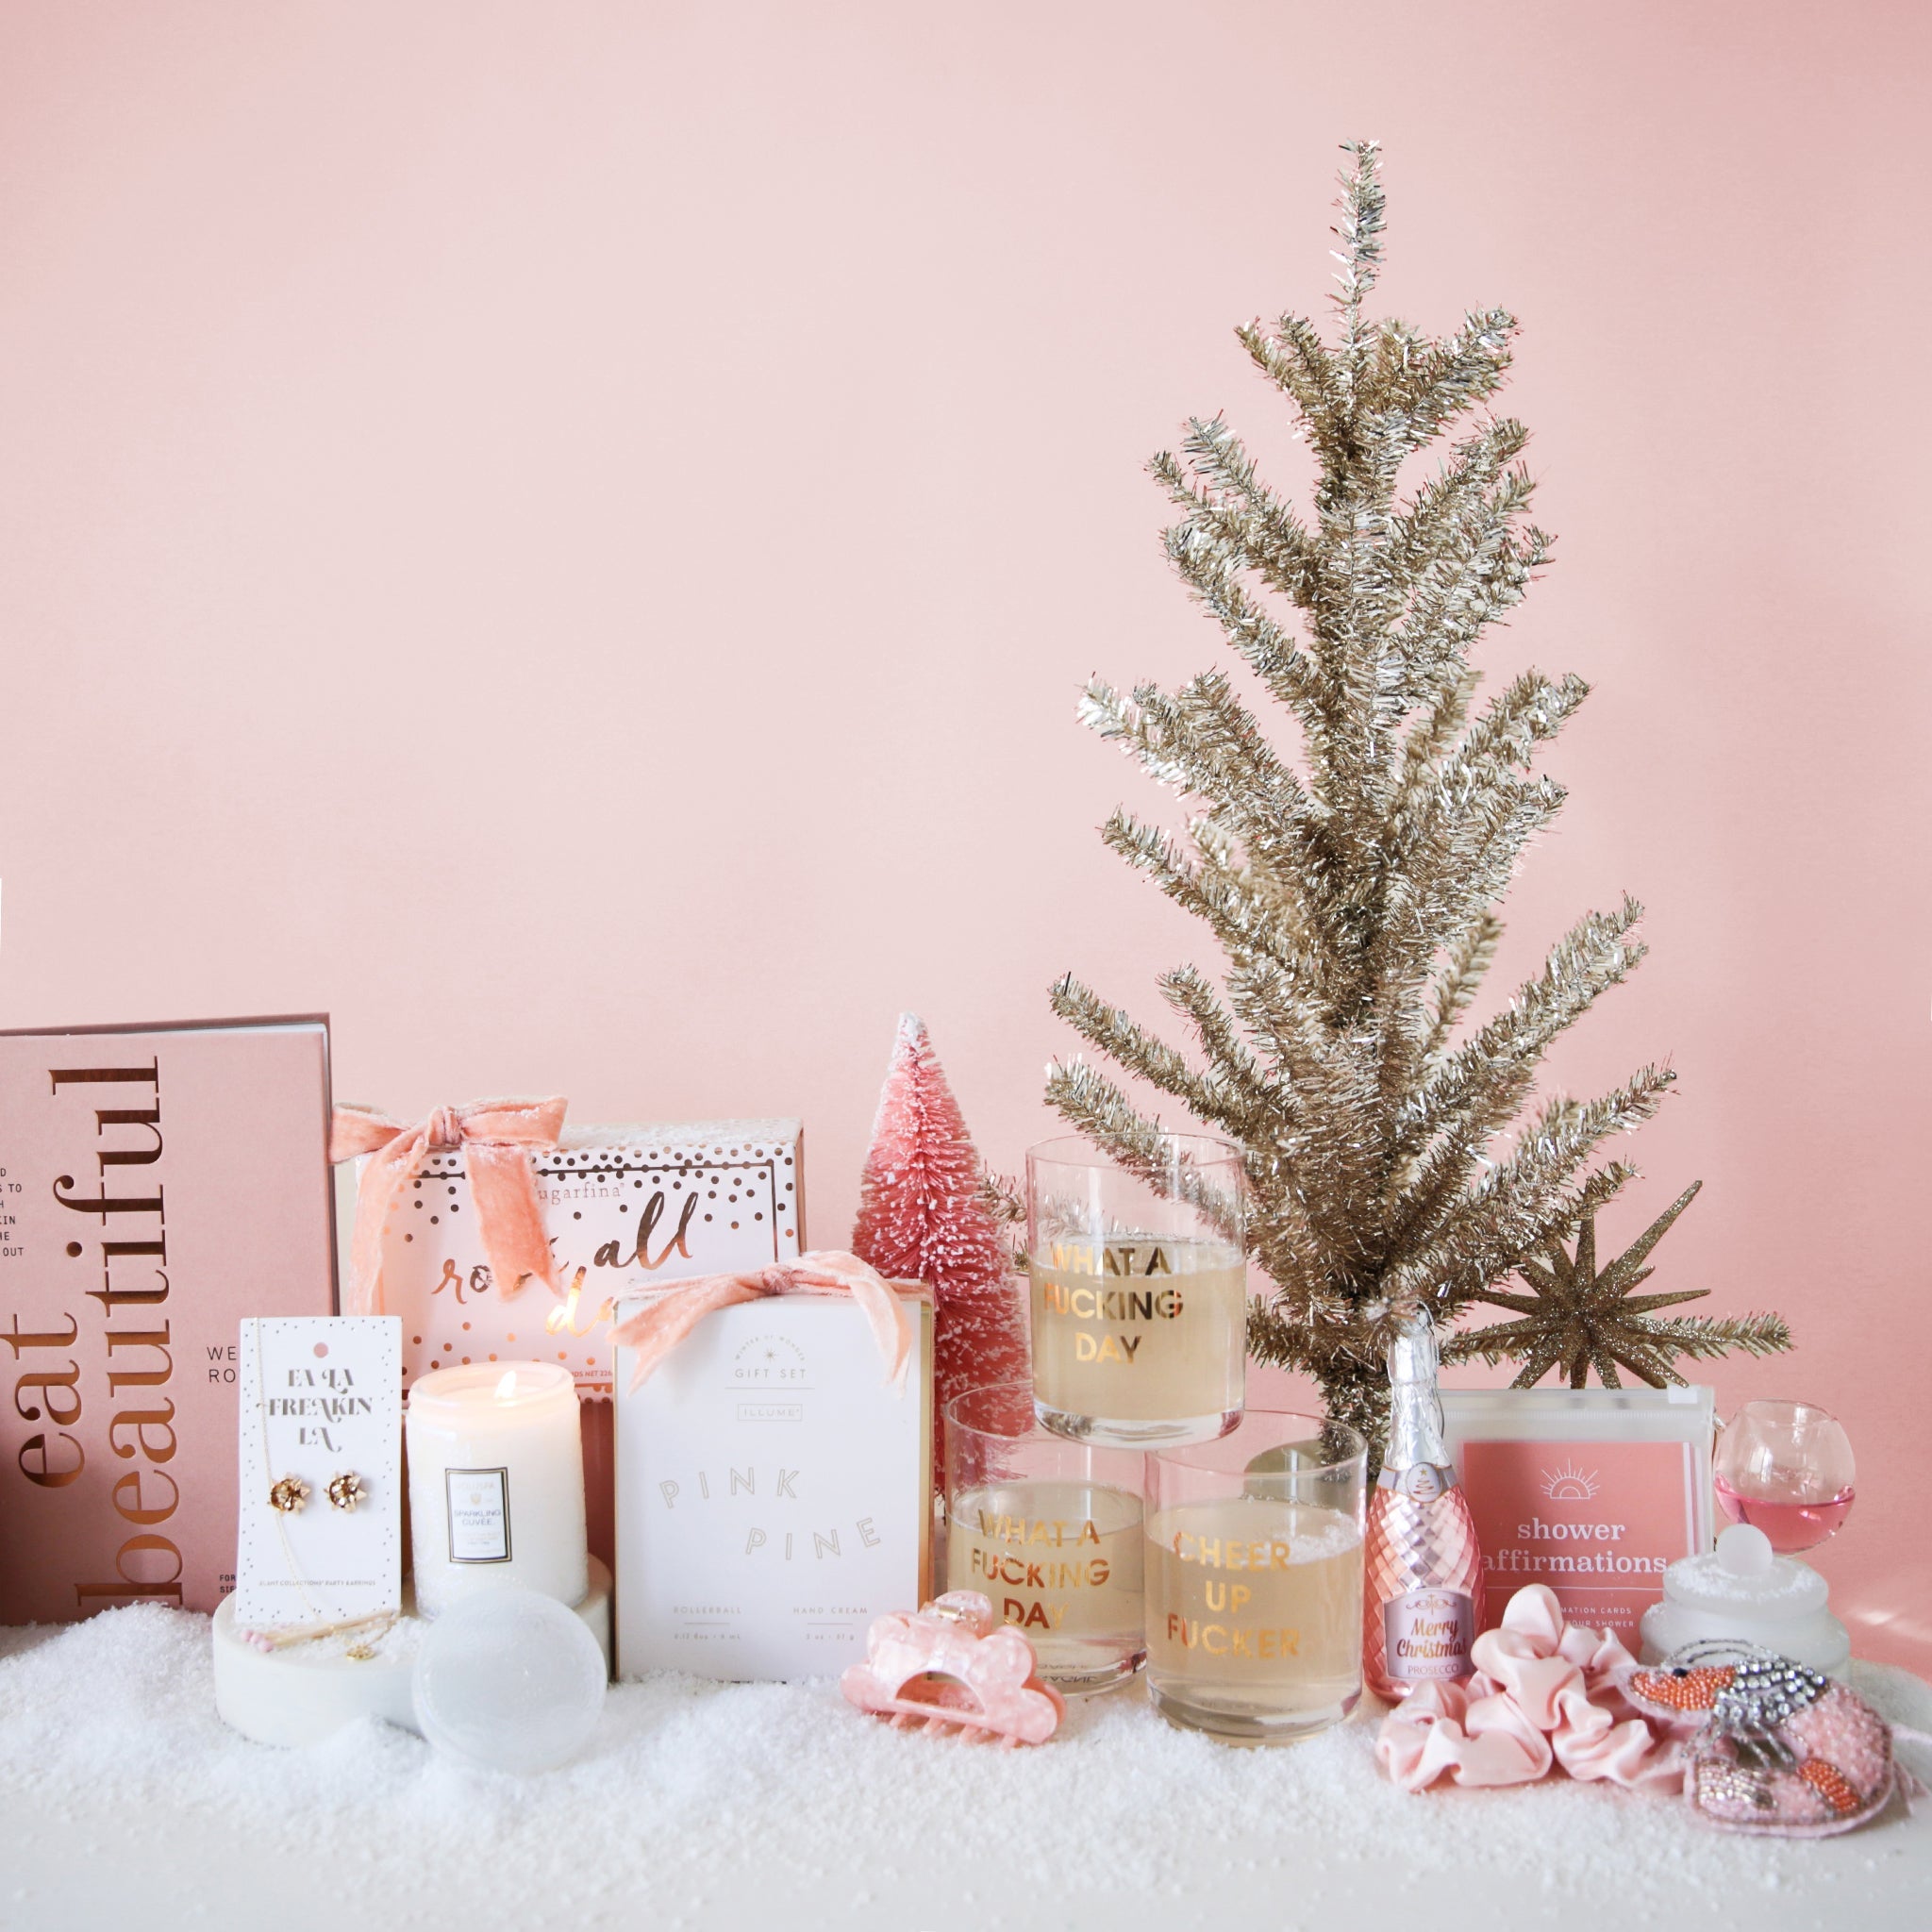 a pink book named eat beautiful, a pair of gold gift bow earrings, a white lit candle, a sugarfina rosé all day gift box, a pink hair clip, three drinking glasses that read what a f-ing day, pink ornaments, all on a pink ground with snow